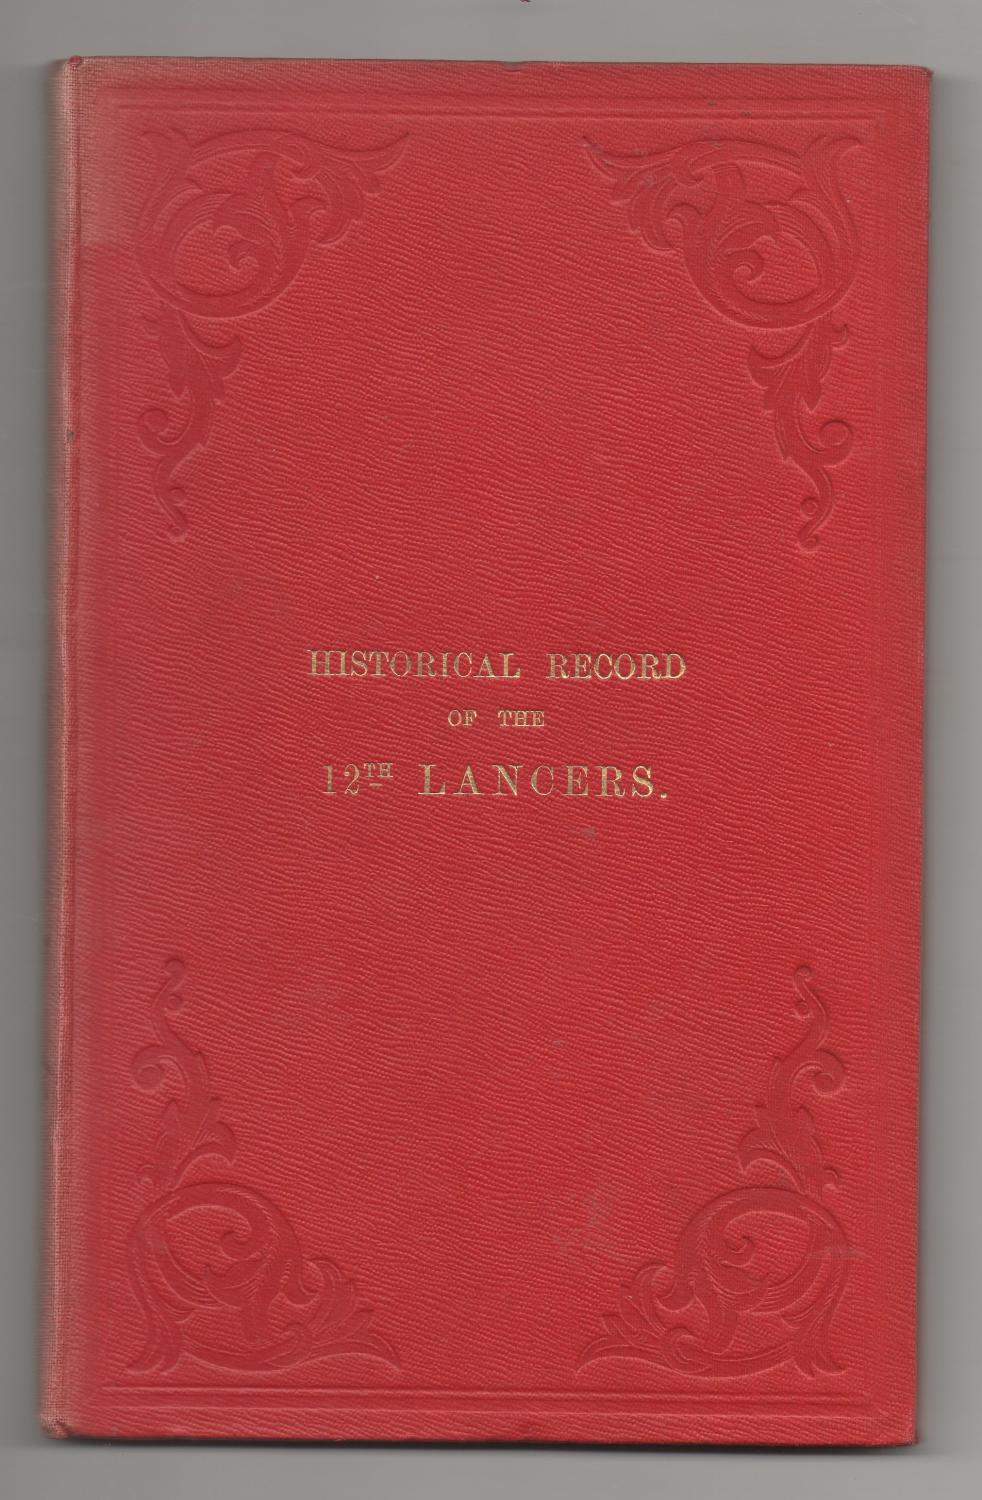 HISTORICAL RECORD OF THE (12TH) TWELFTH OR THE PRINCE OF WALES'S ROYAL REGIMENT OF LANCERS: CONTAINING AN ACCOUNT OF THE FORMATION OF THE REGIMENT IN 1715 AND OF ITS SUBSEQUENT SERVICES TO 1842